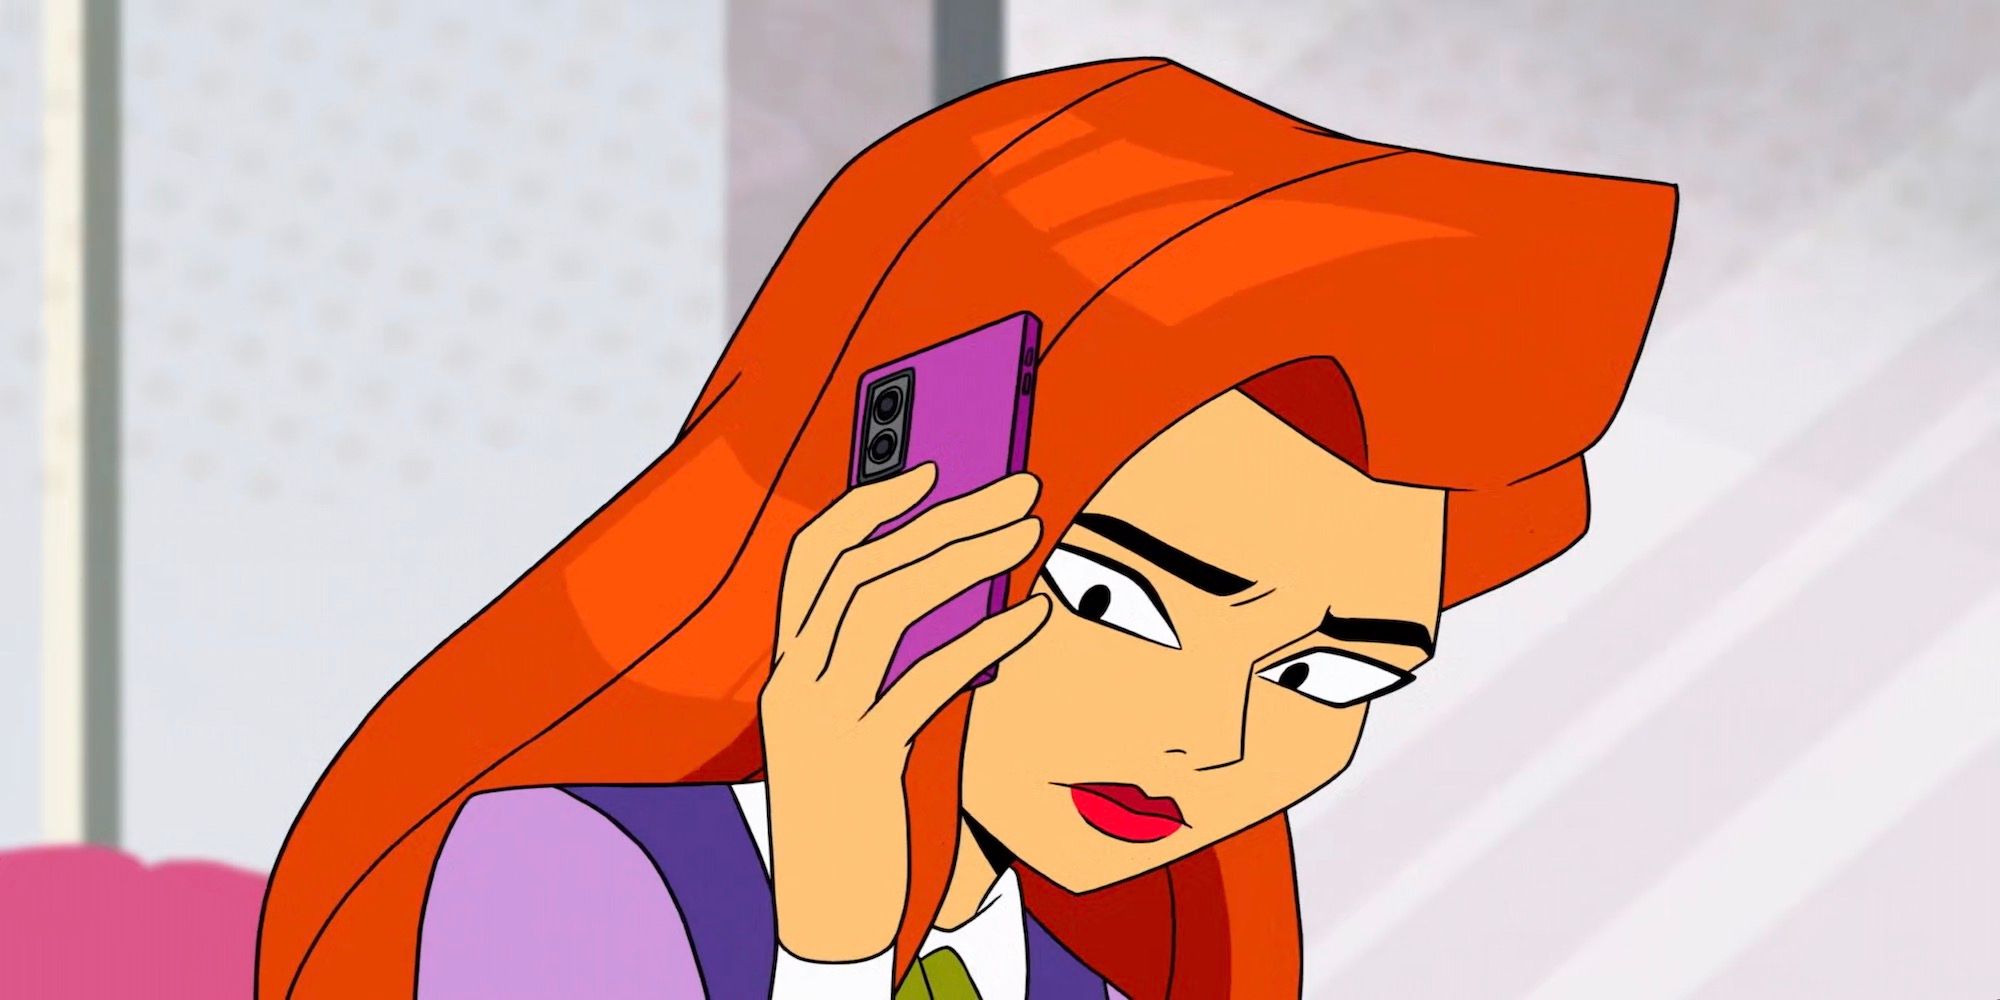 Daphne on the phone in Velma